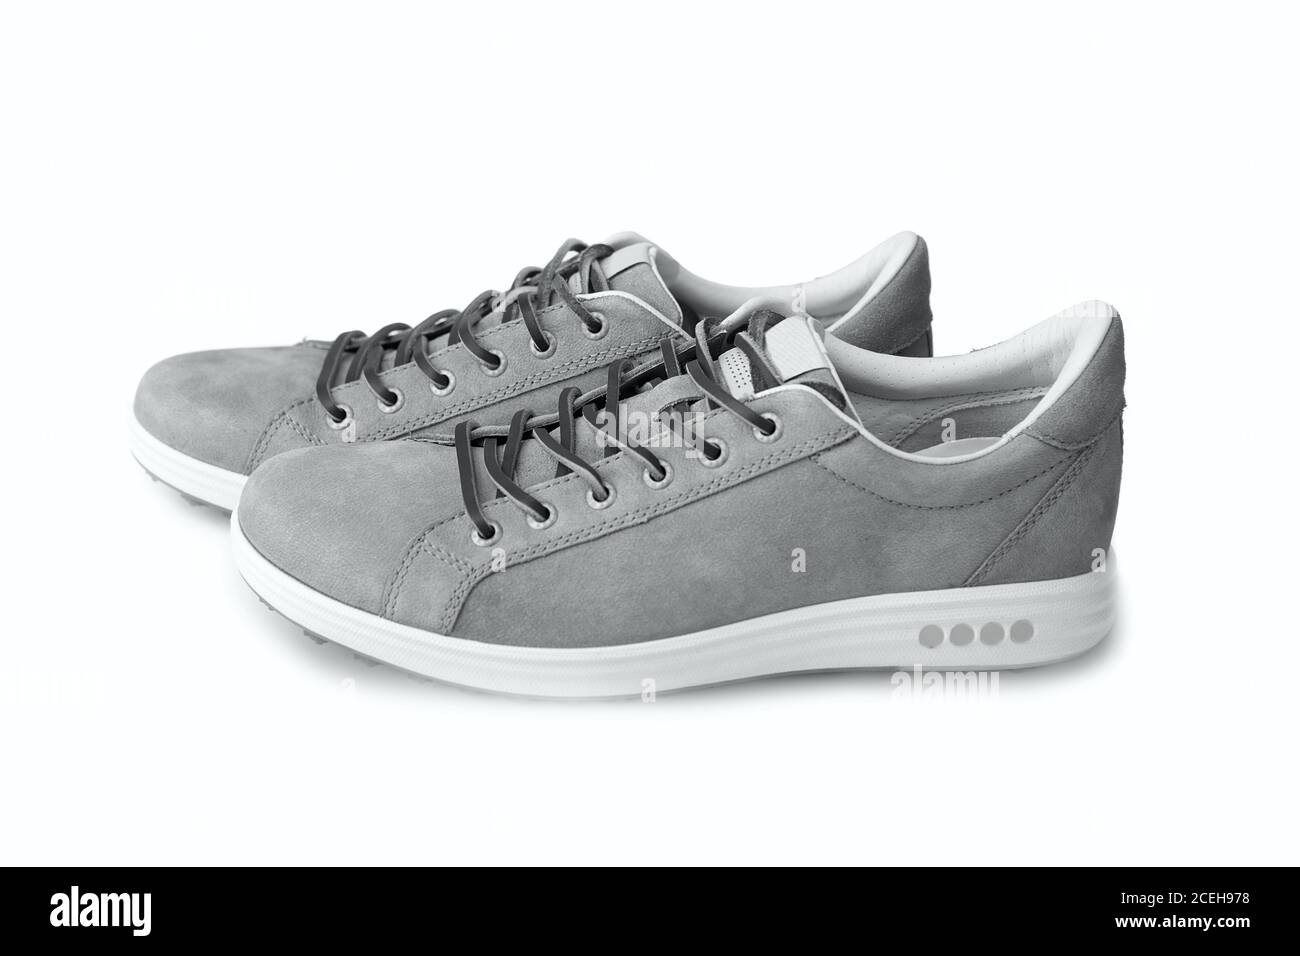 Men's grey nubuck leather sneakers isolated on white background, leather  lace, fabric lining and light platform soles for maximum comfort Stock  Photo - Alamy